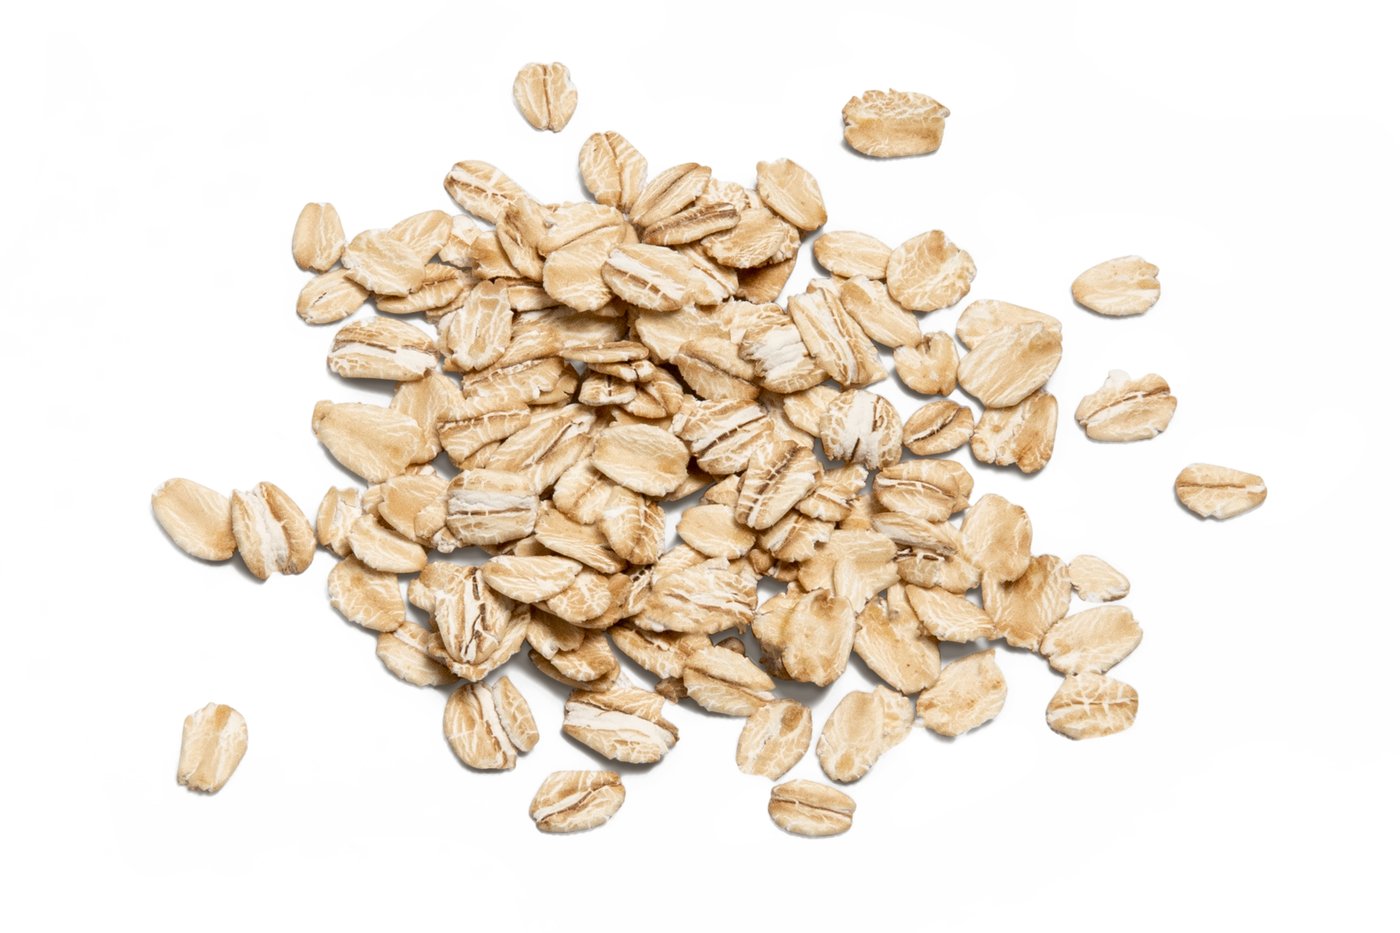 Rolled Oats image zoom